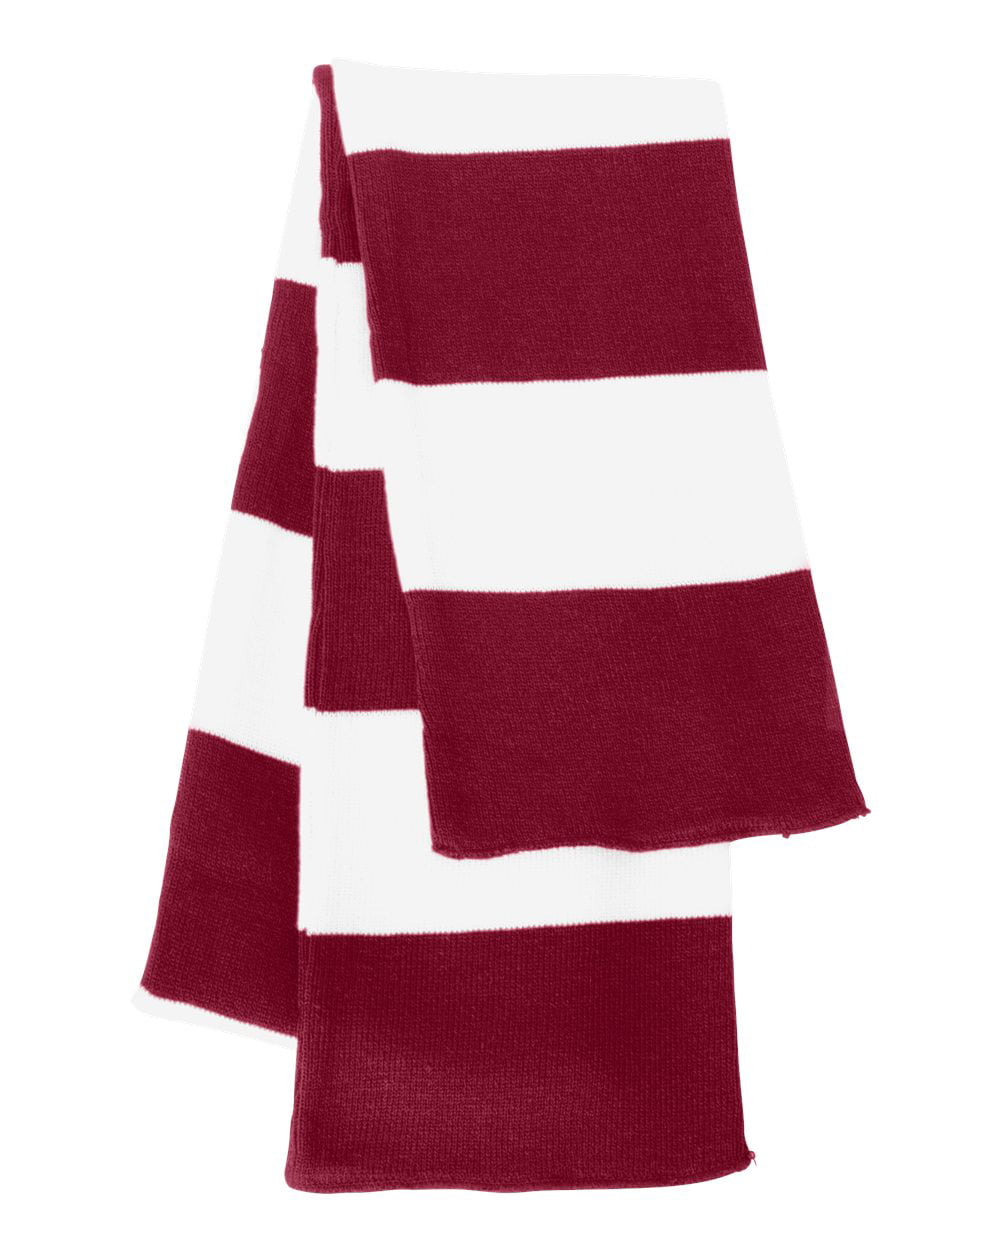 Knit Winter Rugby Striped Scarf for Men & Women - Stay Warm & Stylish (Cardinal/ White)